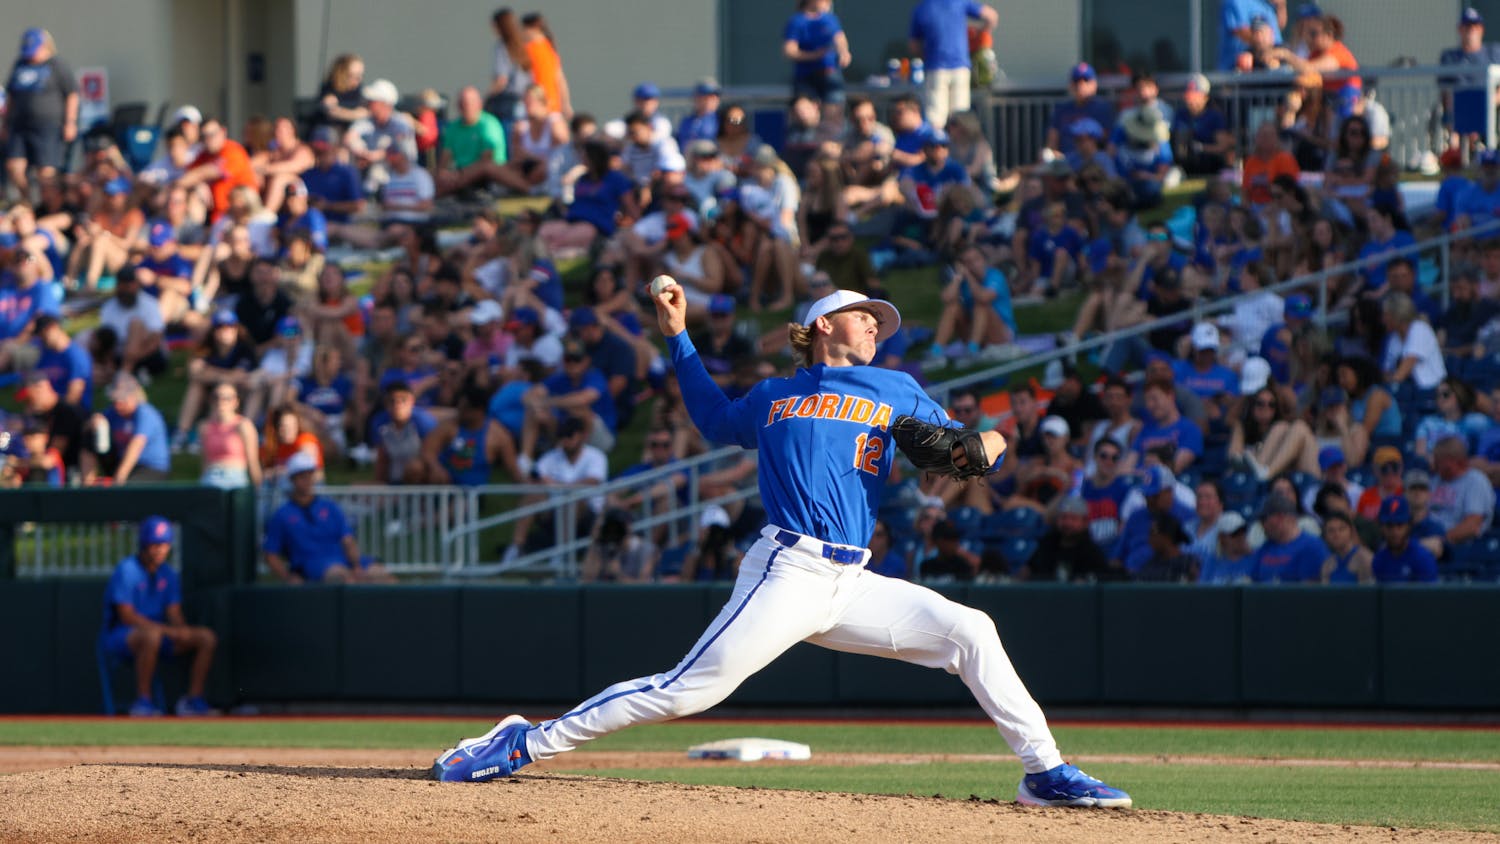 Florida pitcher Hurston Waldrep pitches the ball in the Gators' 13-3 win against the Cincinnati Bearcats Saturday, Feb. 25, 2023.